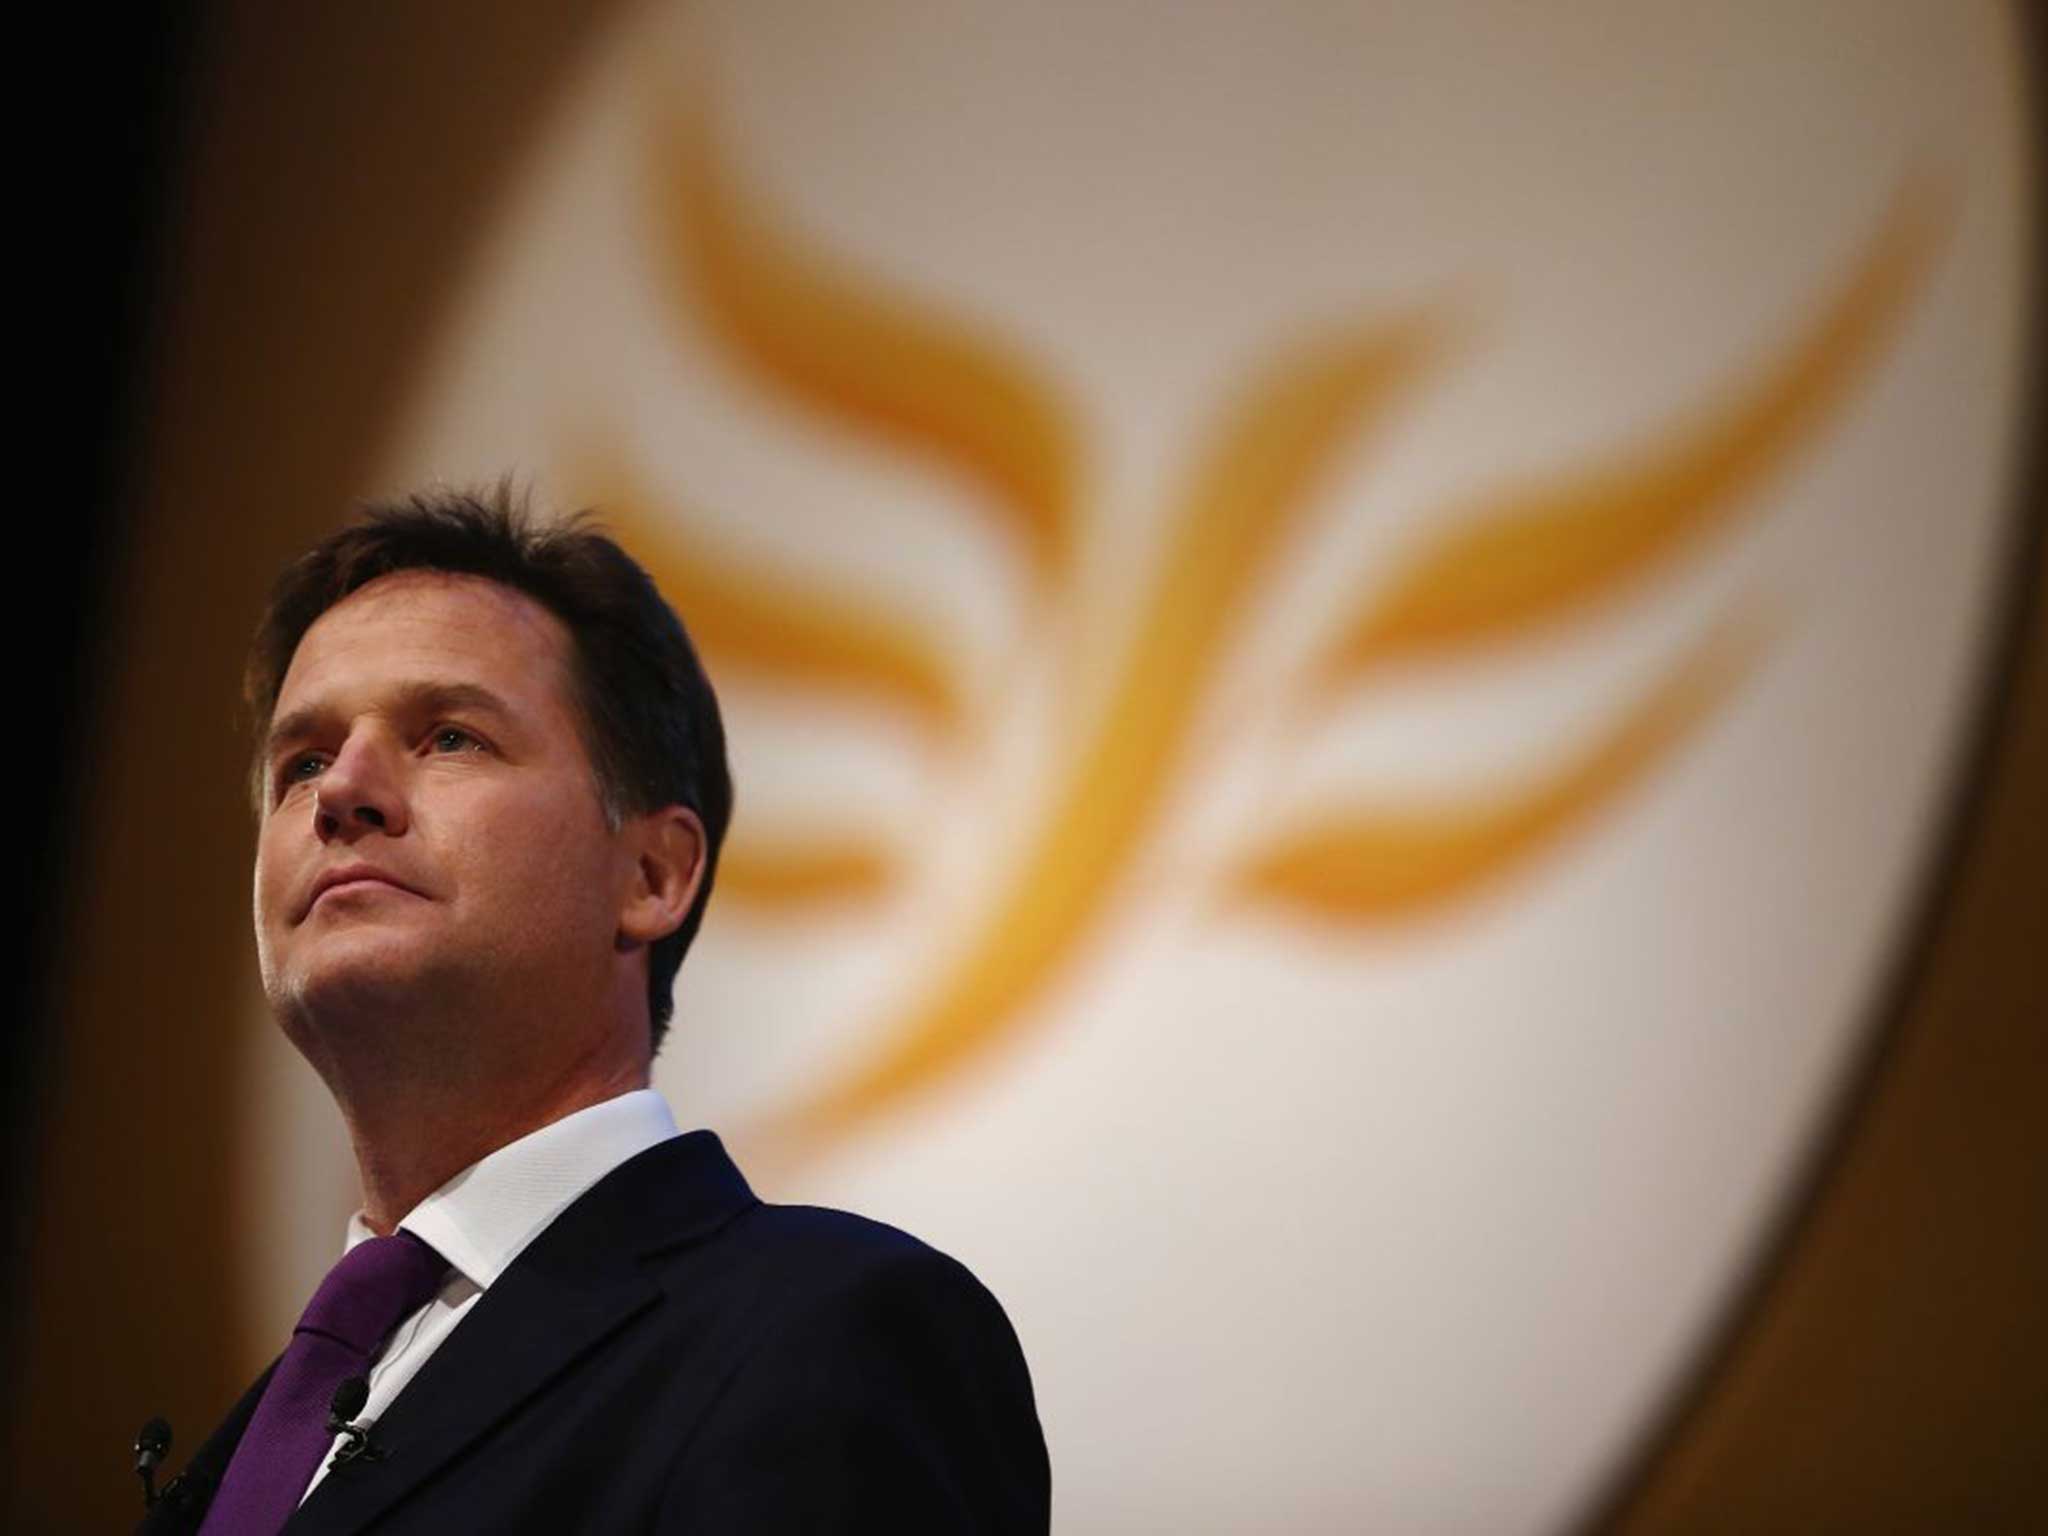 A new election forecast indicates Nick Clegg's Liberal Democrats may hold the power in deciding who forms the next government